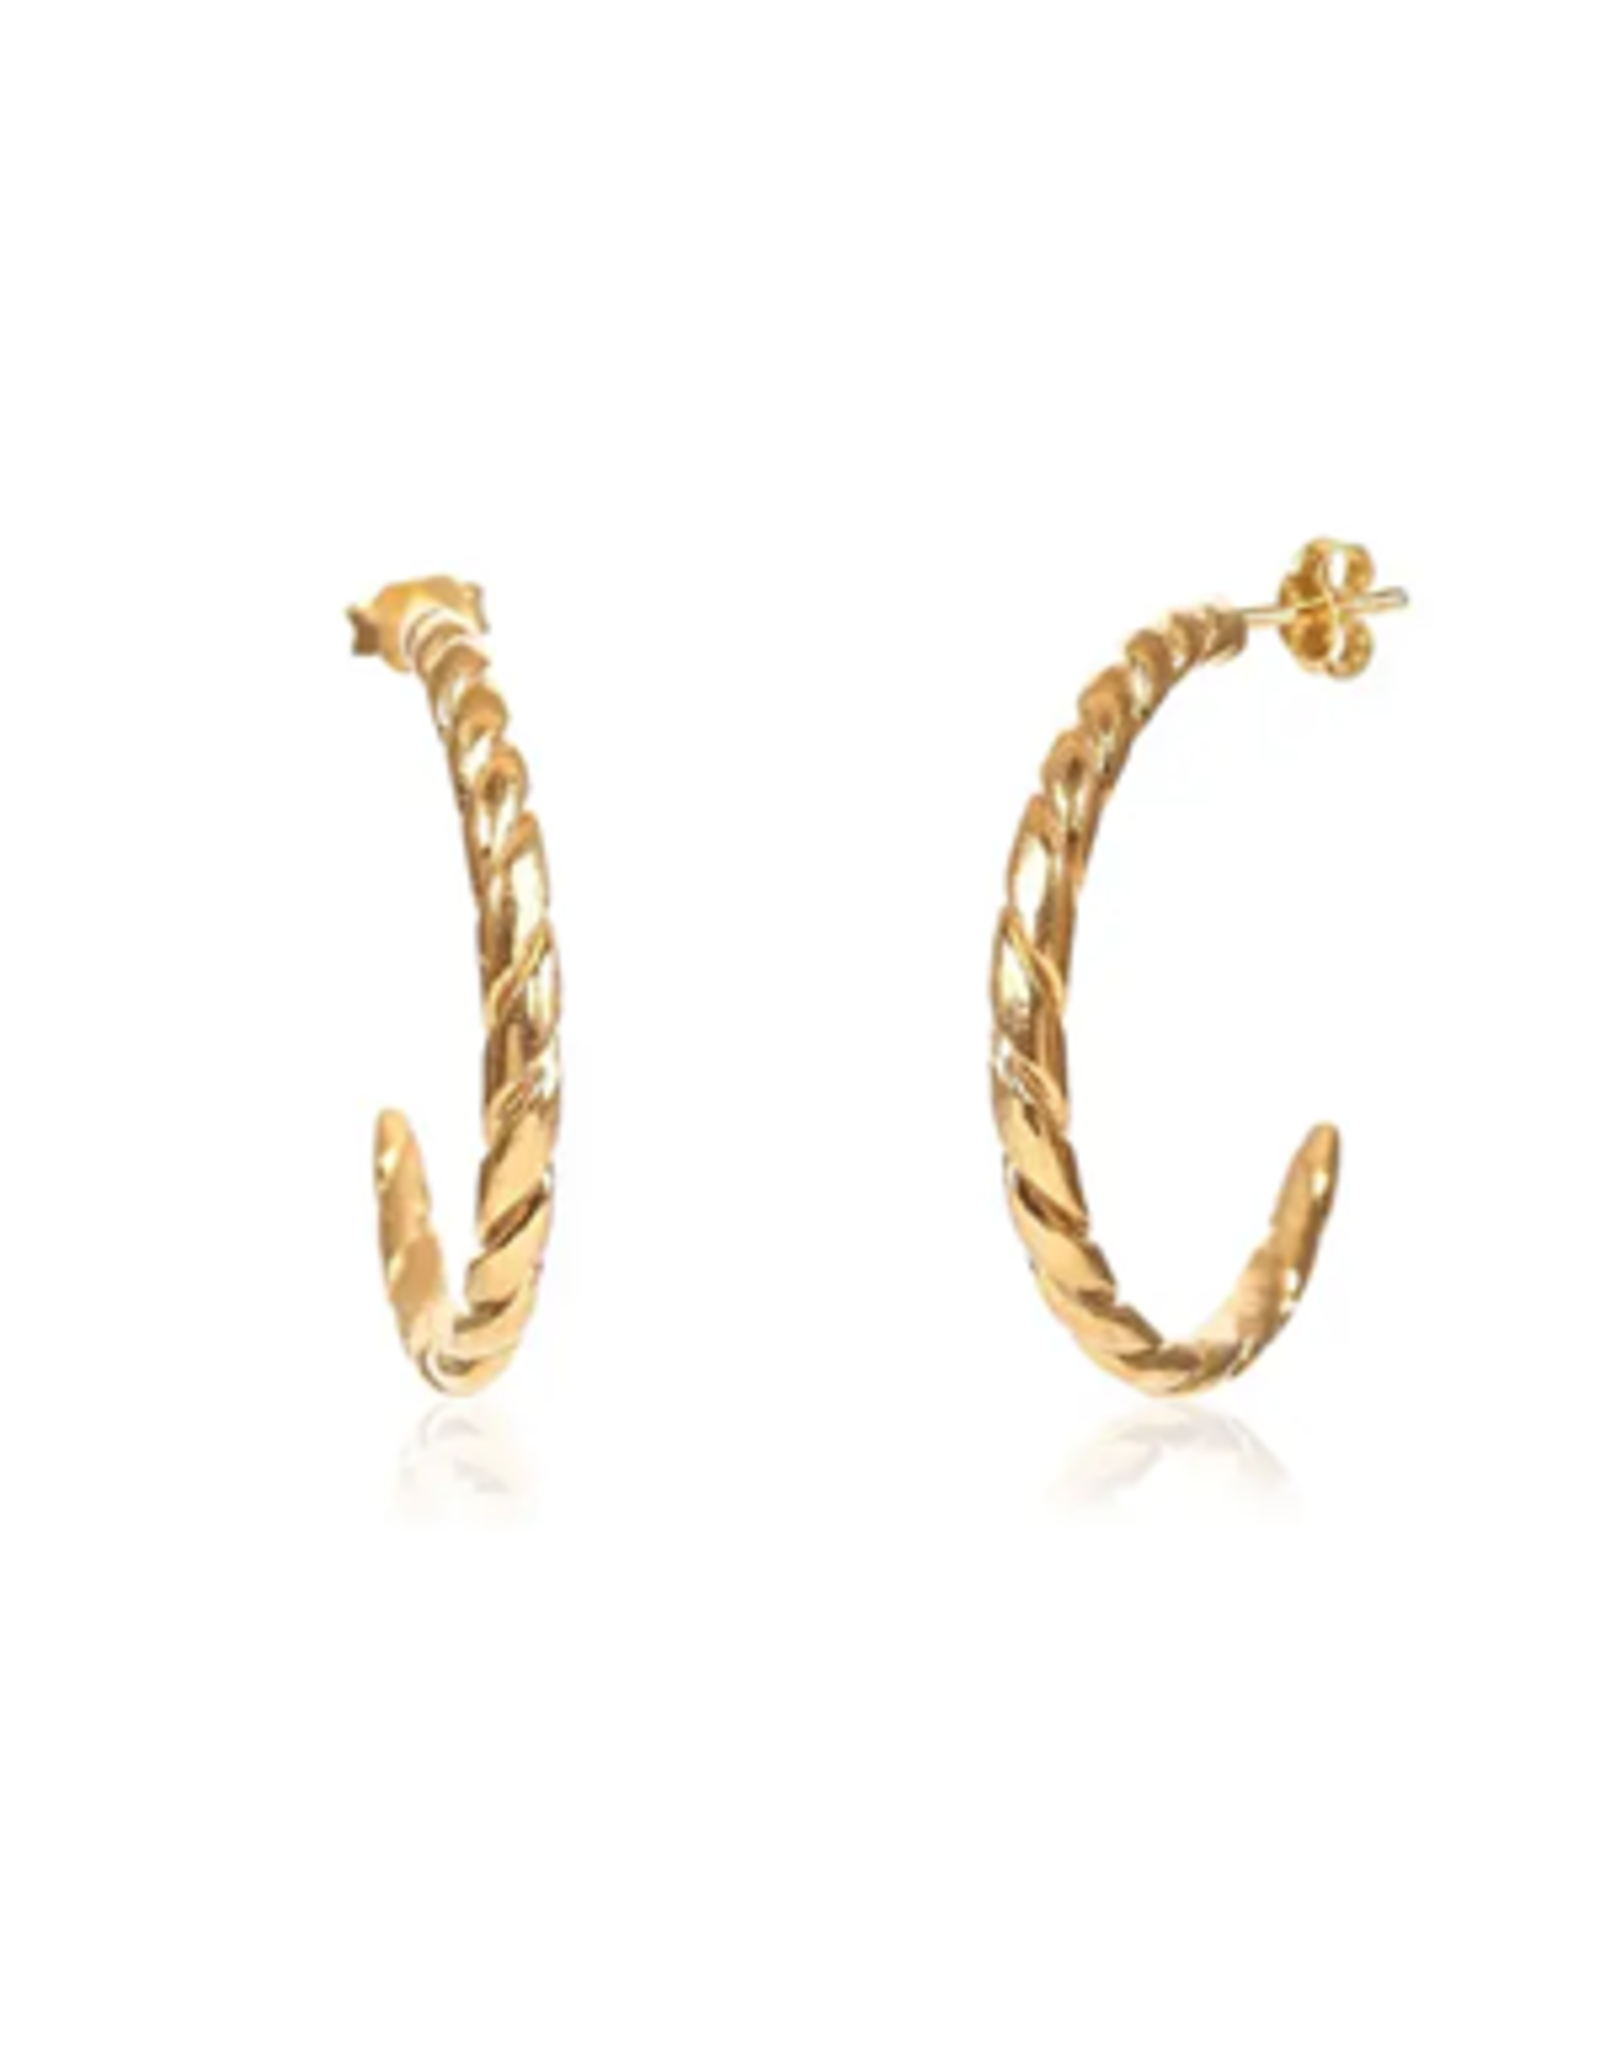 Chakarr Jewelry Gold Braided Hoops